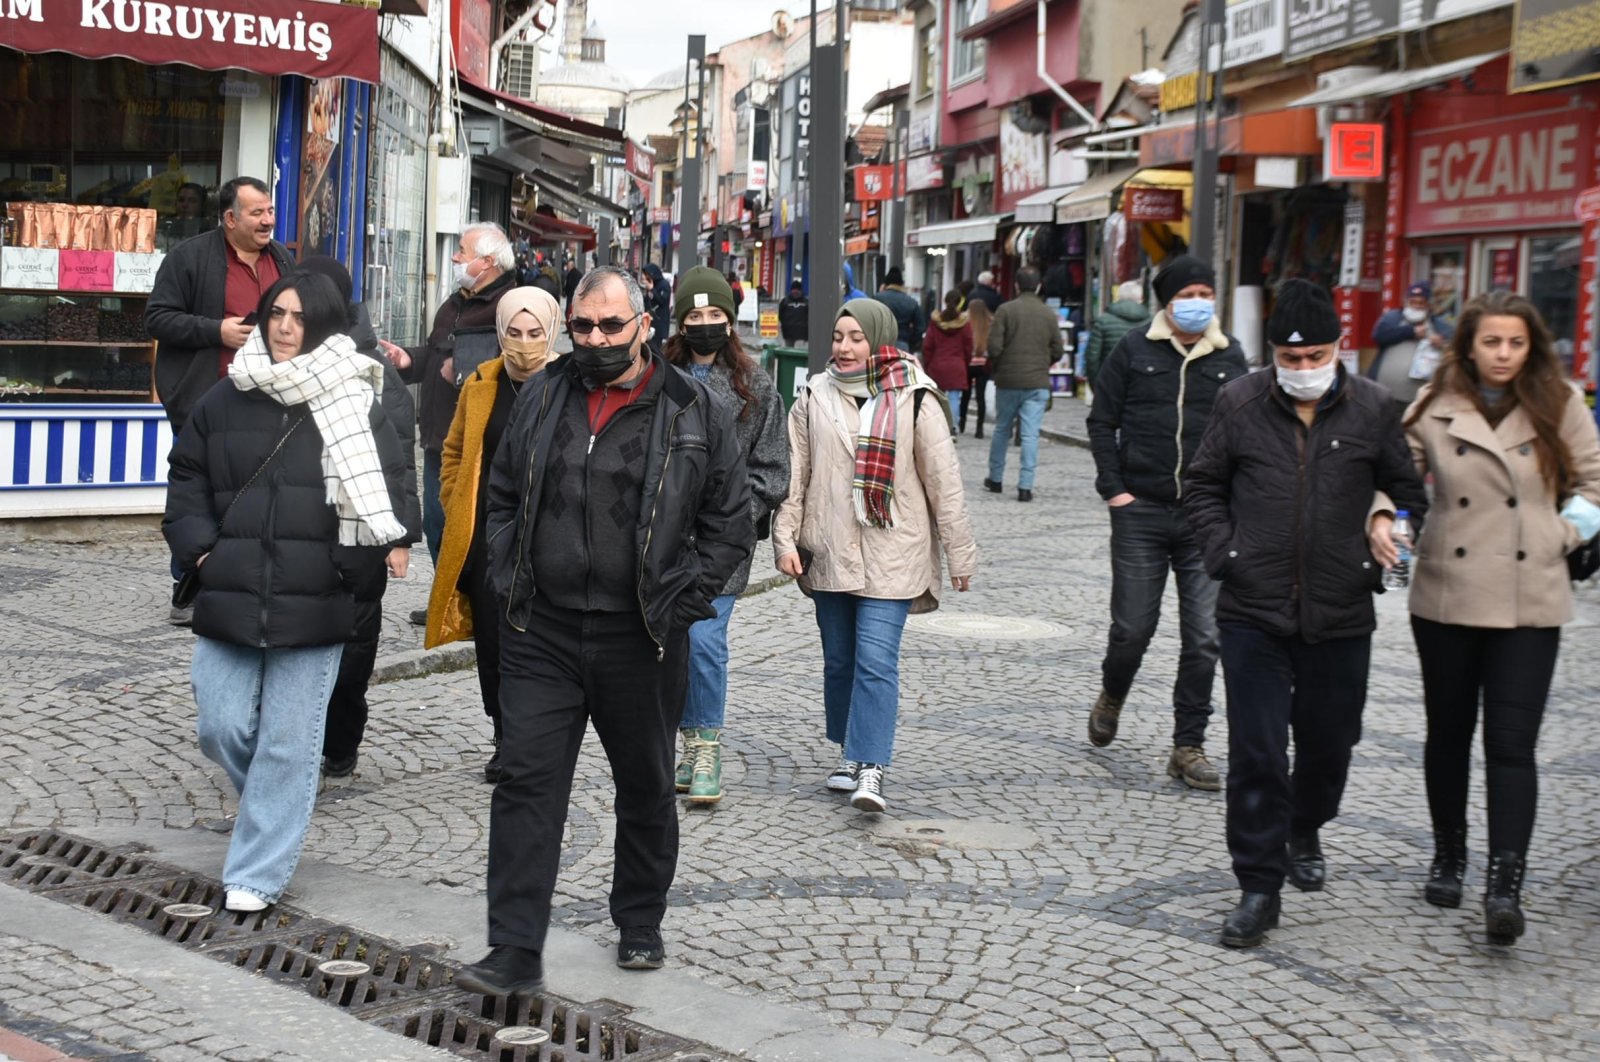 A mix of people wearing and not wearing protective masks against COVID-19 walk on a street in Edirne, northwestern Turkey, Dec. 15, 2021. (DHA PHOTO) 